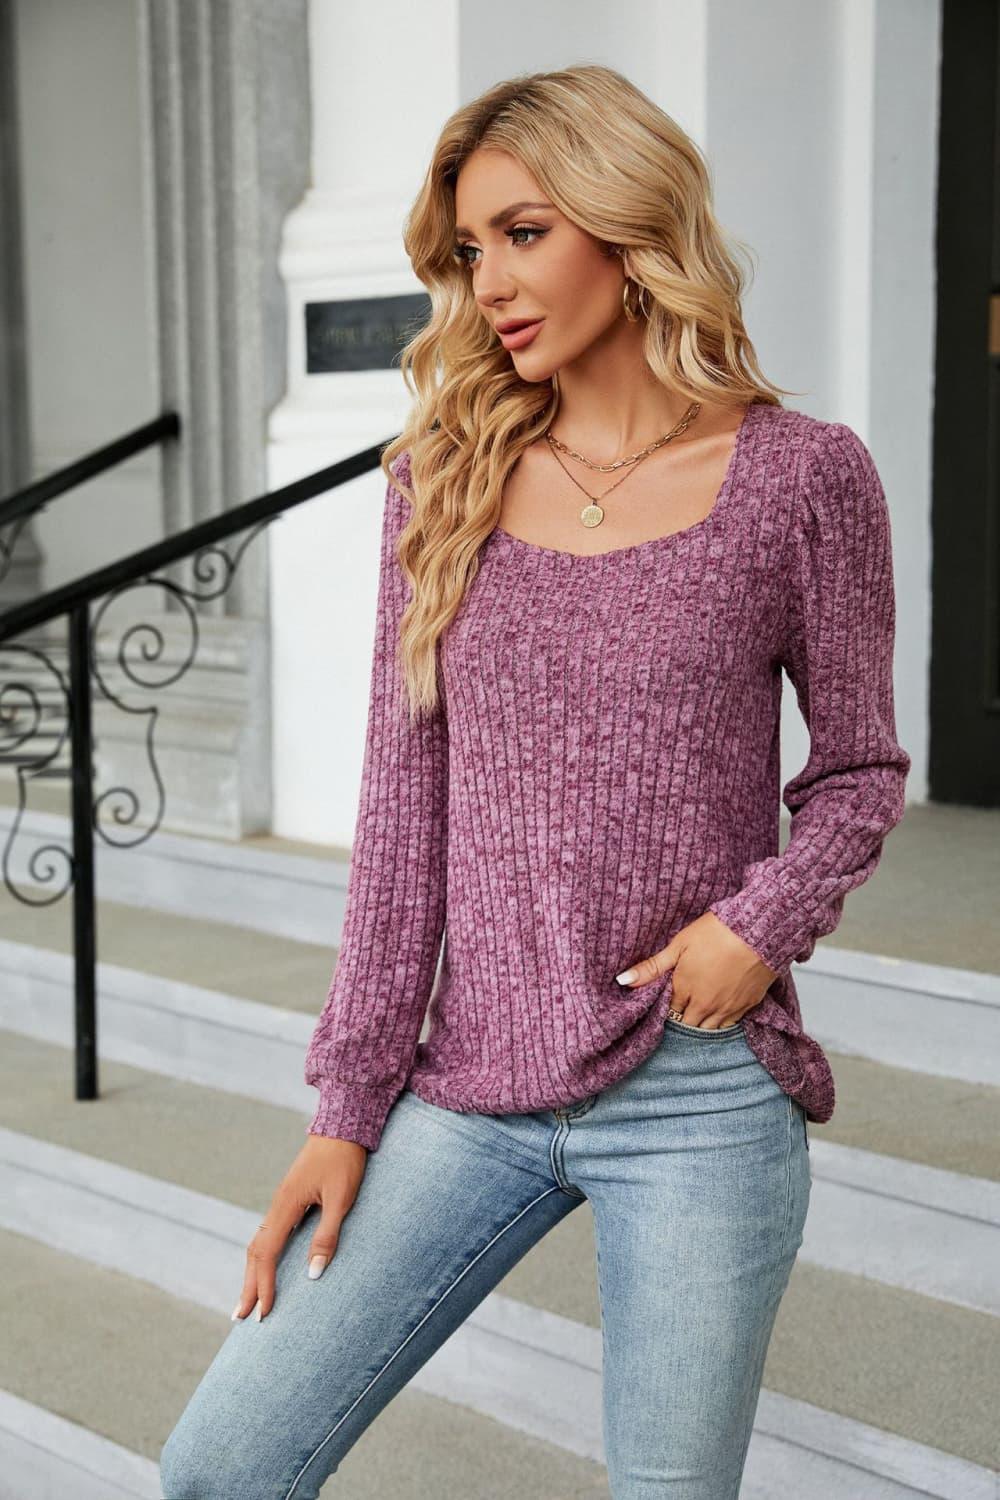 Shop the Perfect Ribbed Square Neck Top for Effortless Style